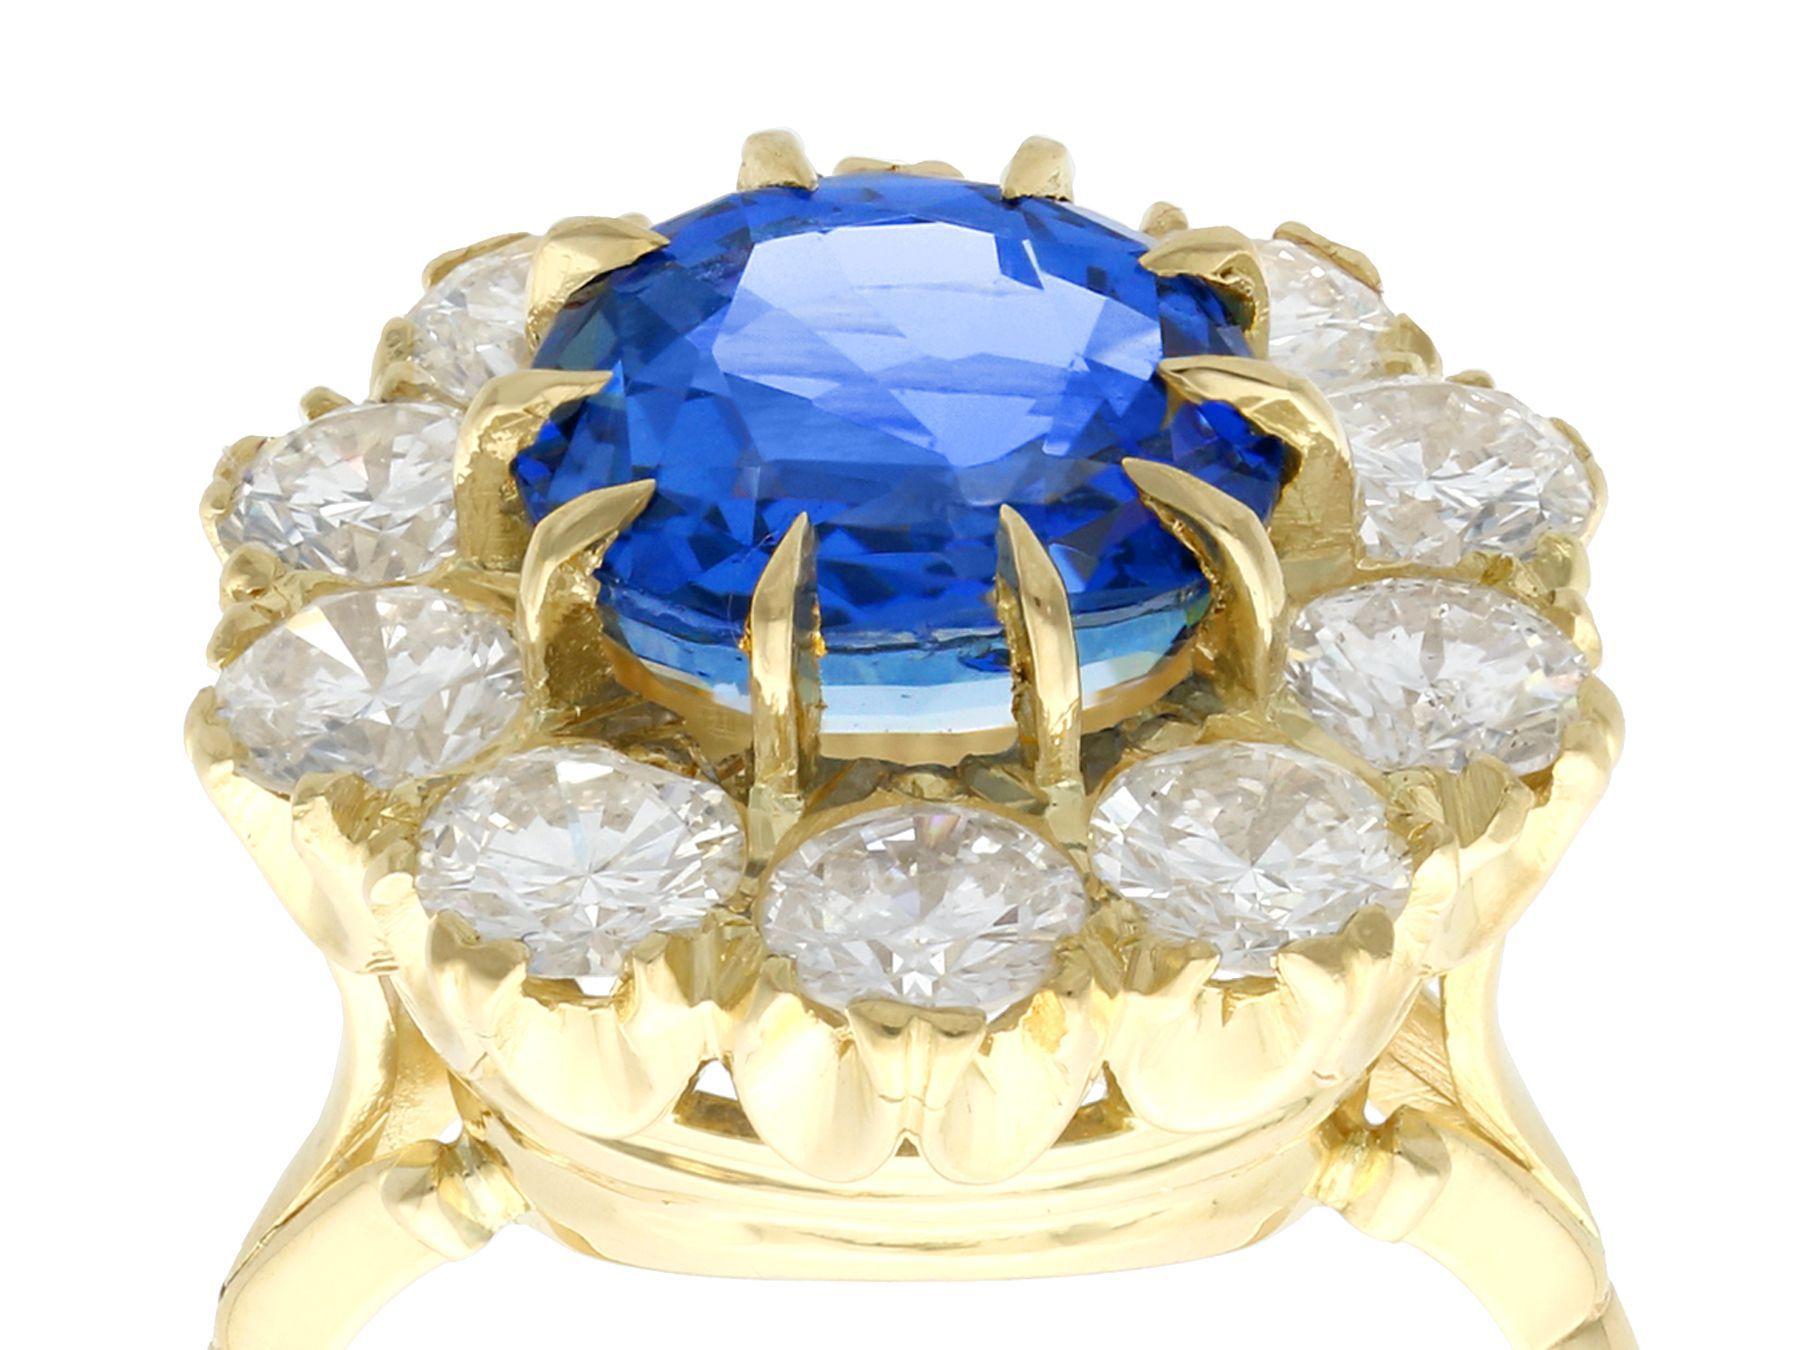 A stunning vintage 6.20 carat Ceylon sapphire and 3.20 carat diamond, 18 karat yellow and white gold cluster ring; part of our diverse gemstone jewelry and estate jewelry collections.

This stunning, fine and impressive vintage sapphire ring has